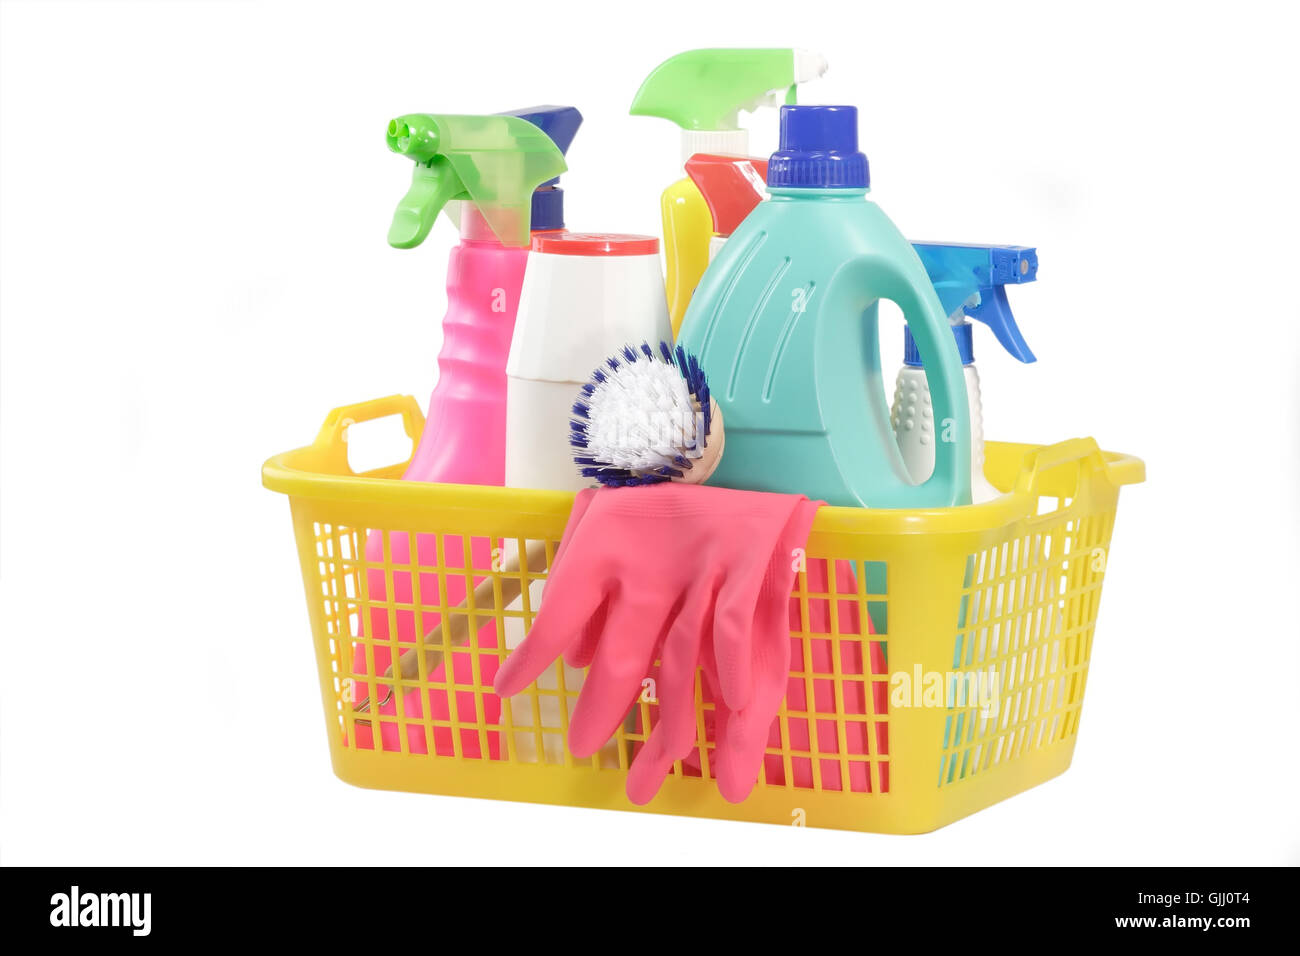 cleaning inventory Stock Photo